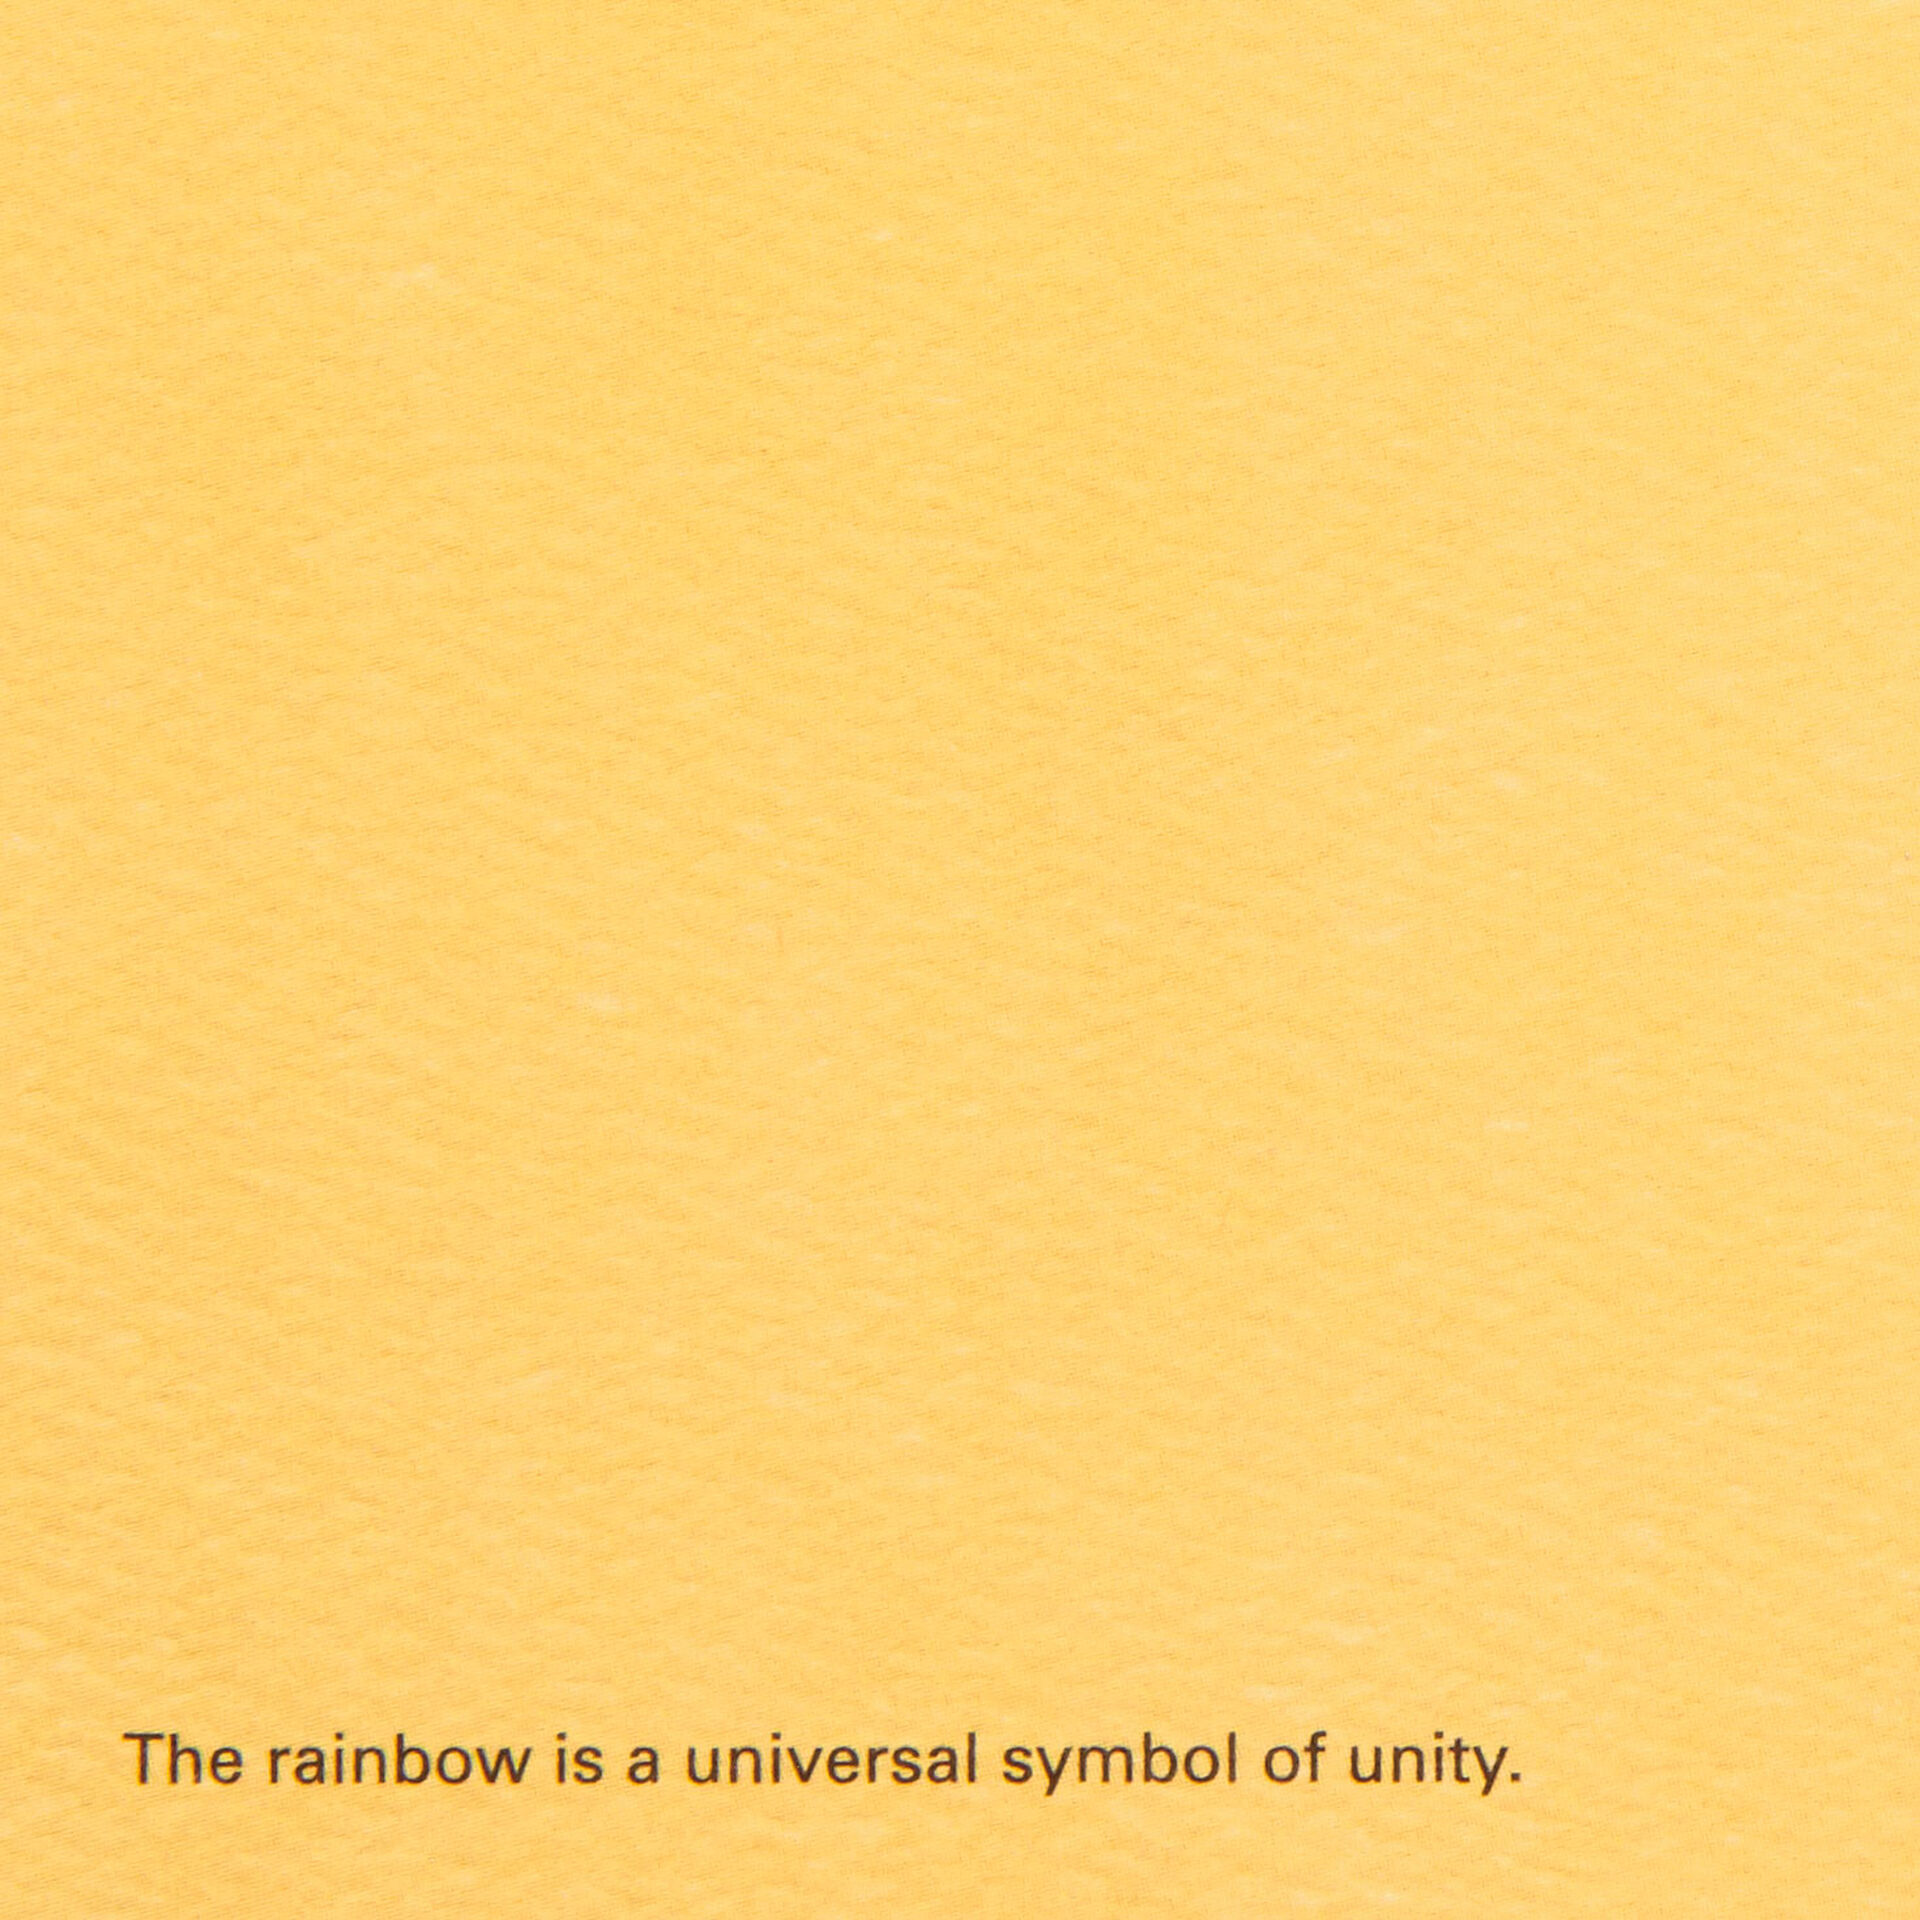 Rainbow-Flower-Blank-Just-Because-Card_459UCT8072_02